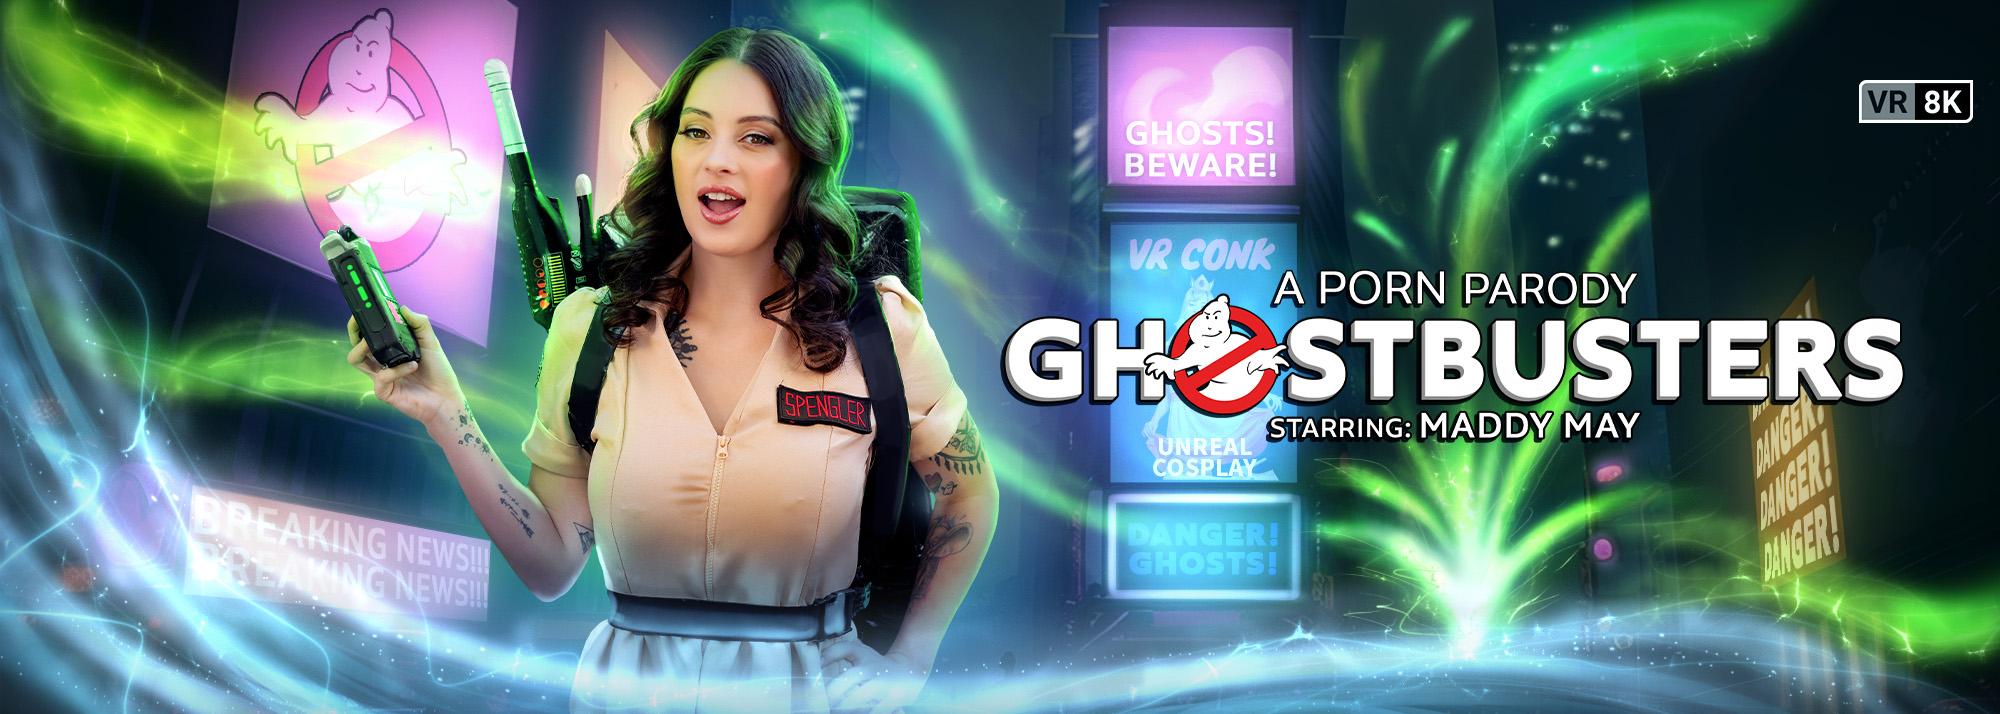 Ghostbusters (A Porn Parody) - VR Video, Starring: Maddy May